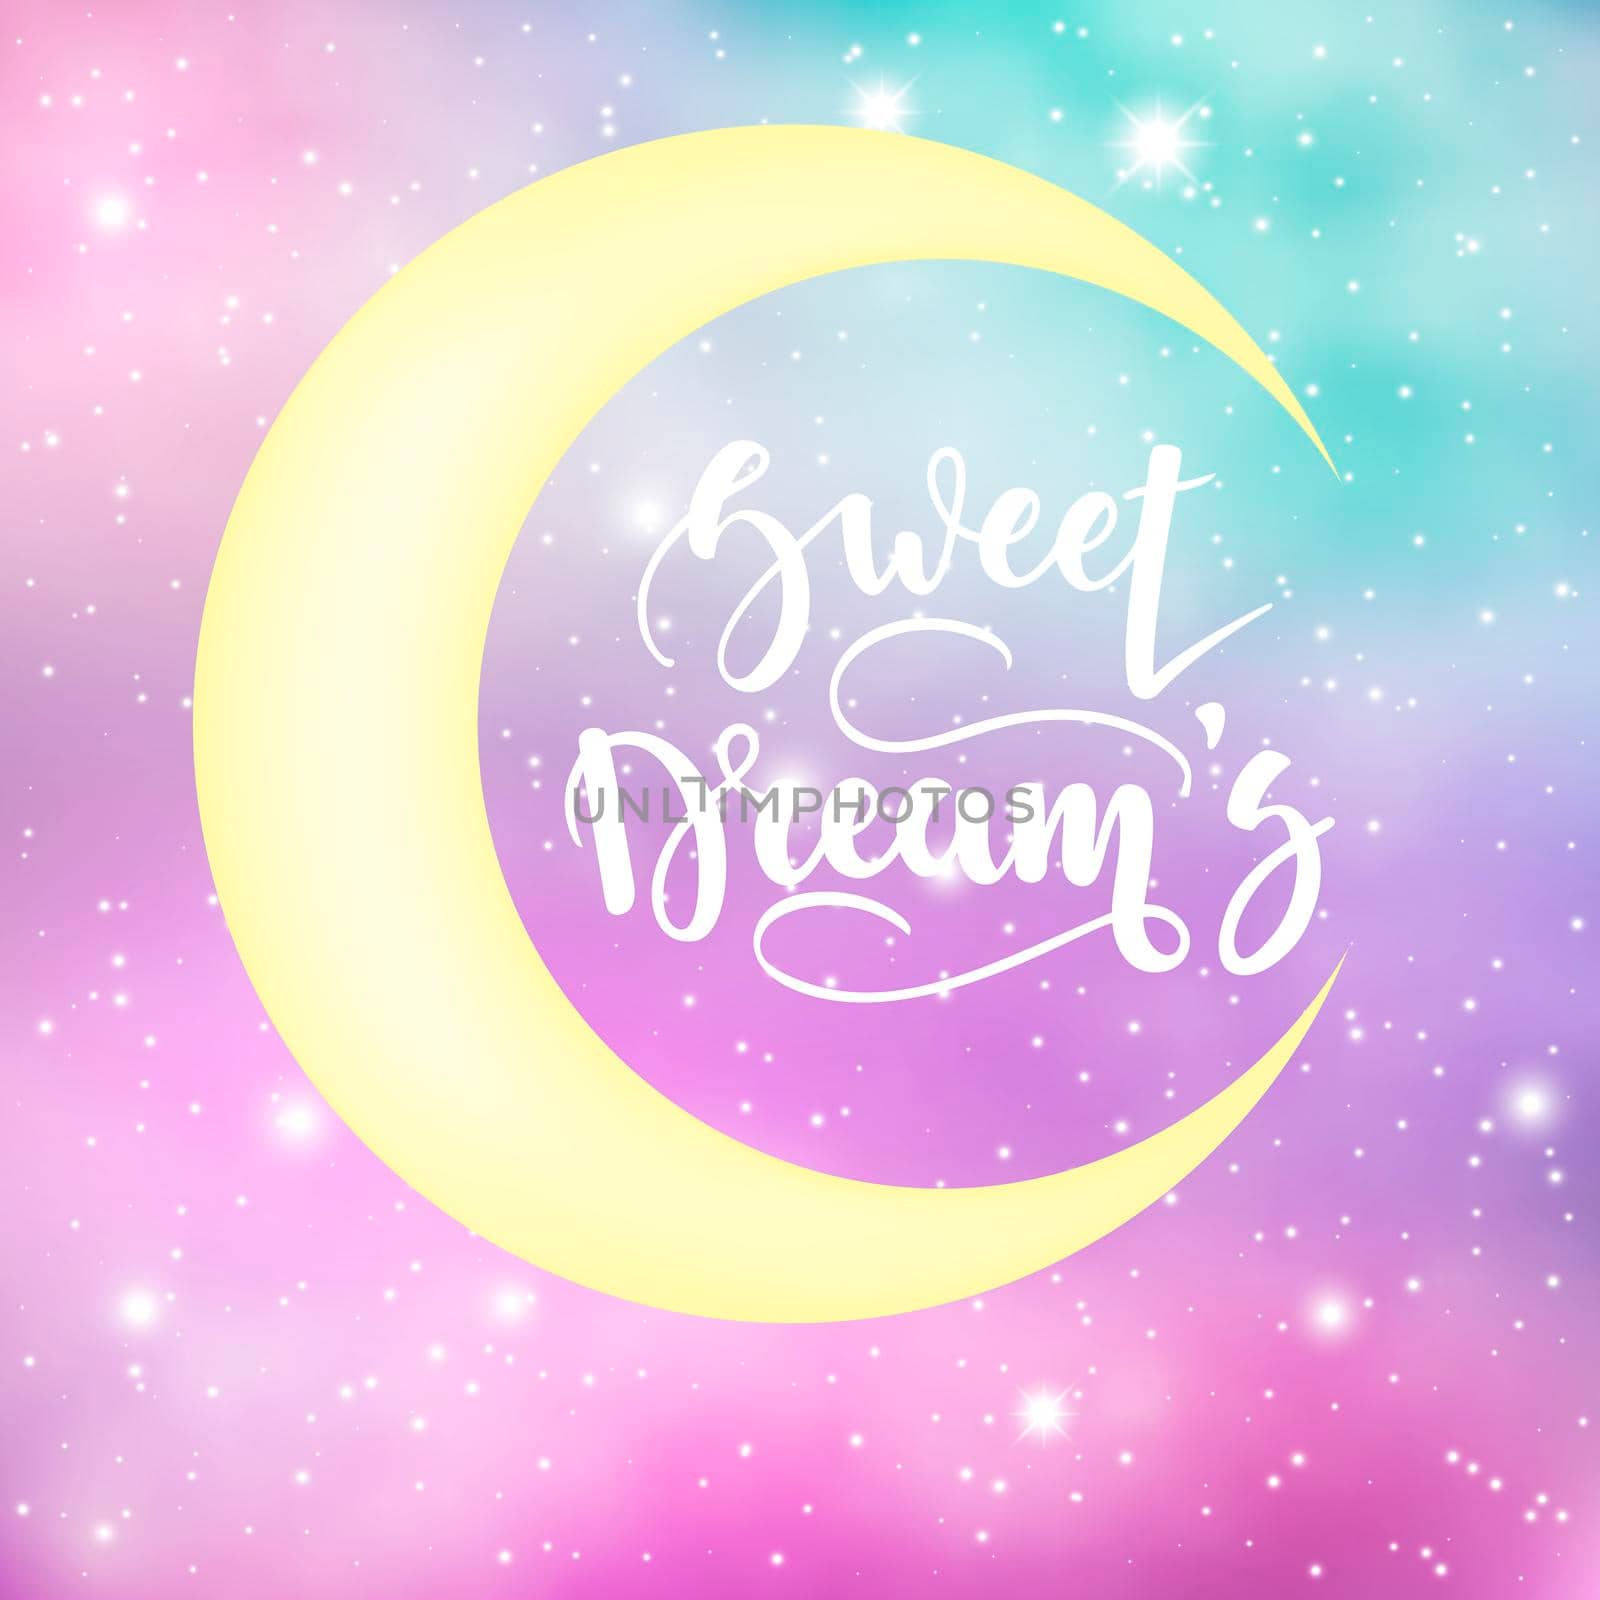 Sweet Dreams. Inspirational and motivational handwritten lettering on a background of the night starry sky. Can be used for posters, cards and other items. ilustration.10 by Marin4ik